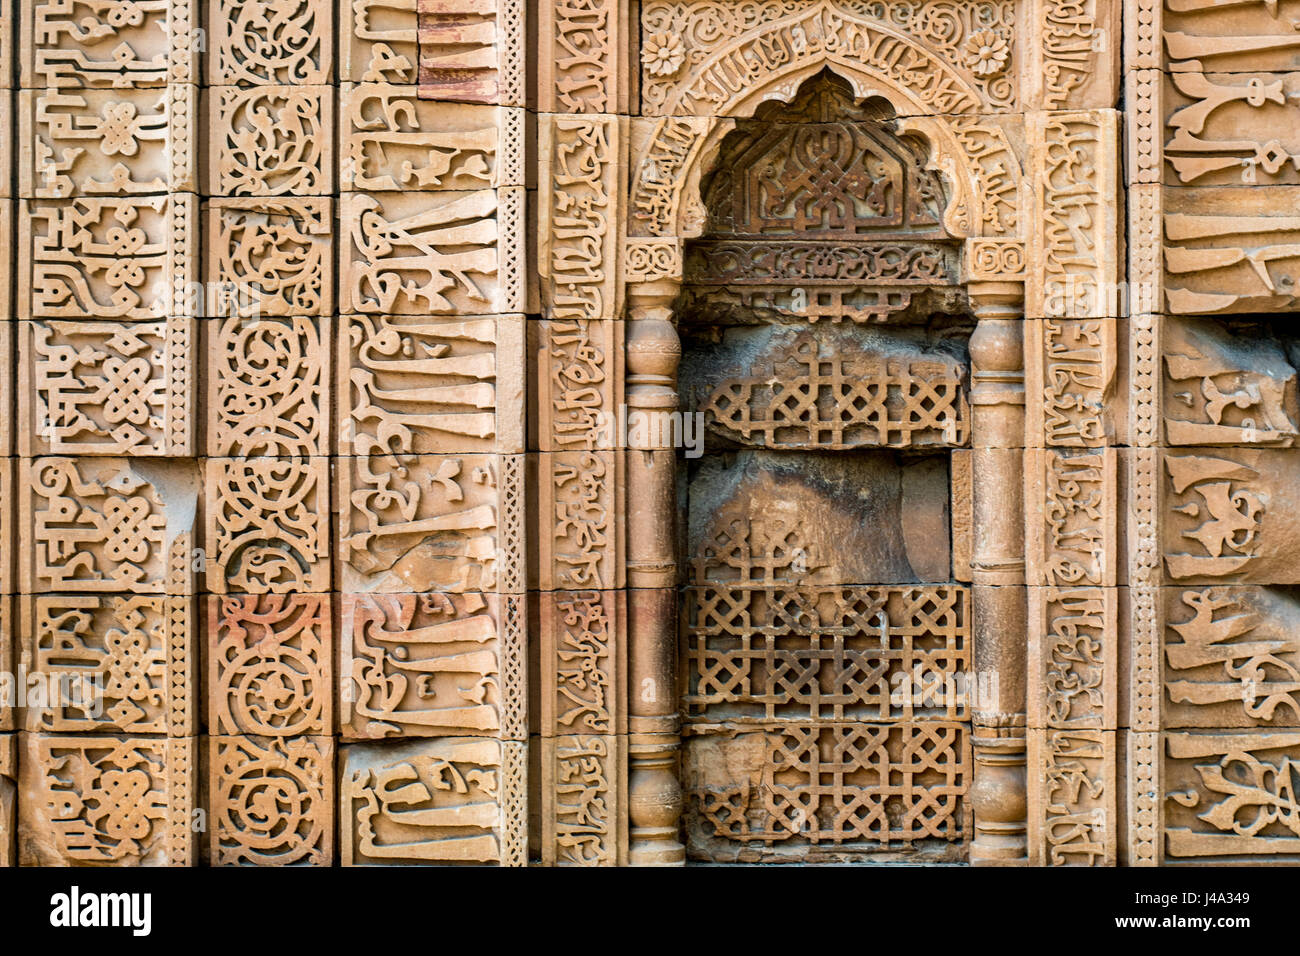 Close up details of the Qutub Minar, the world's tallest minaret structure. Located in New Delhi, India. Stock Photo